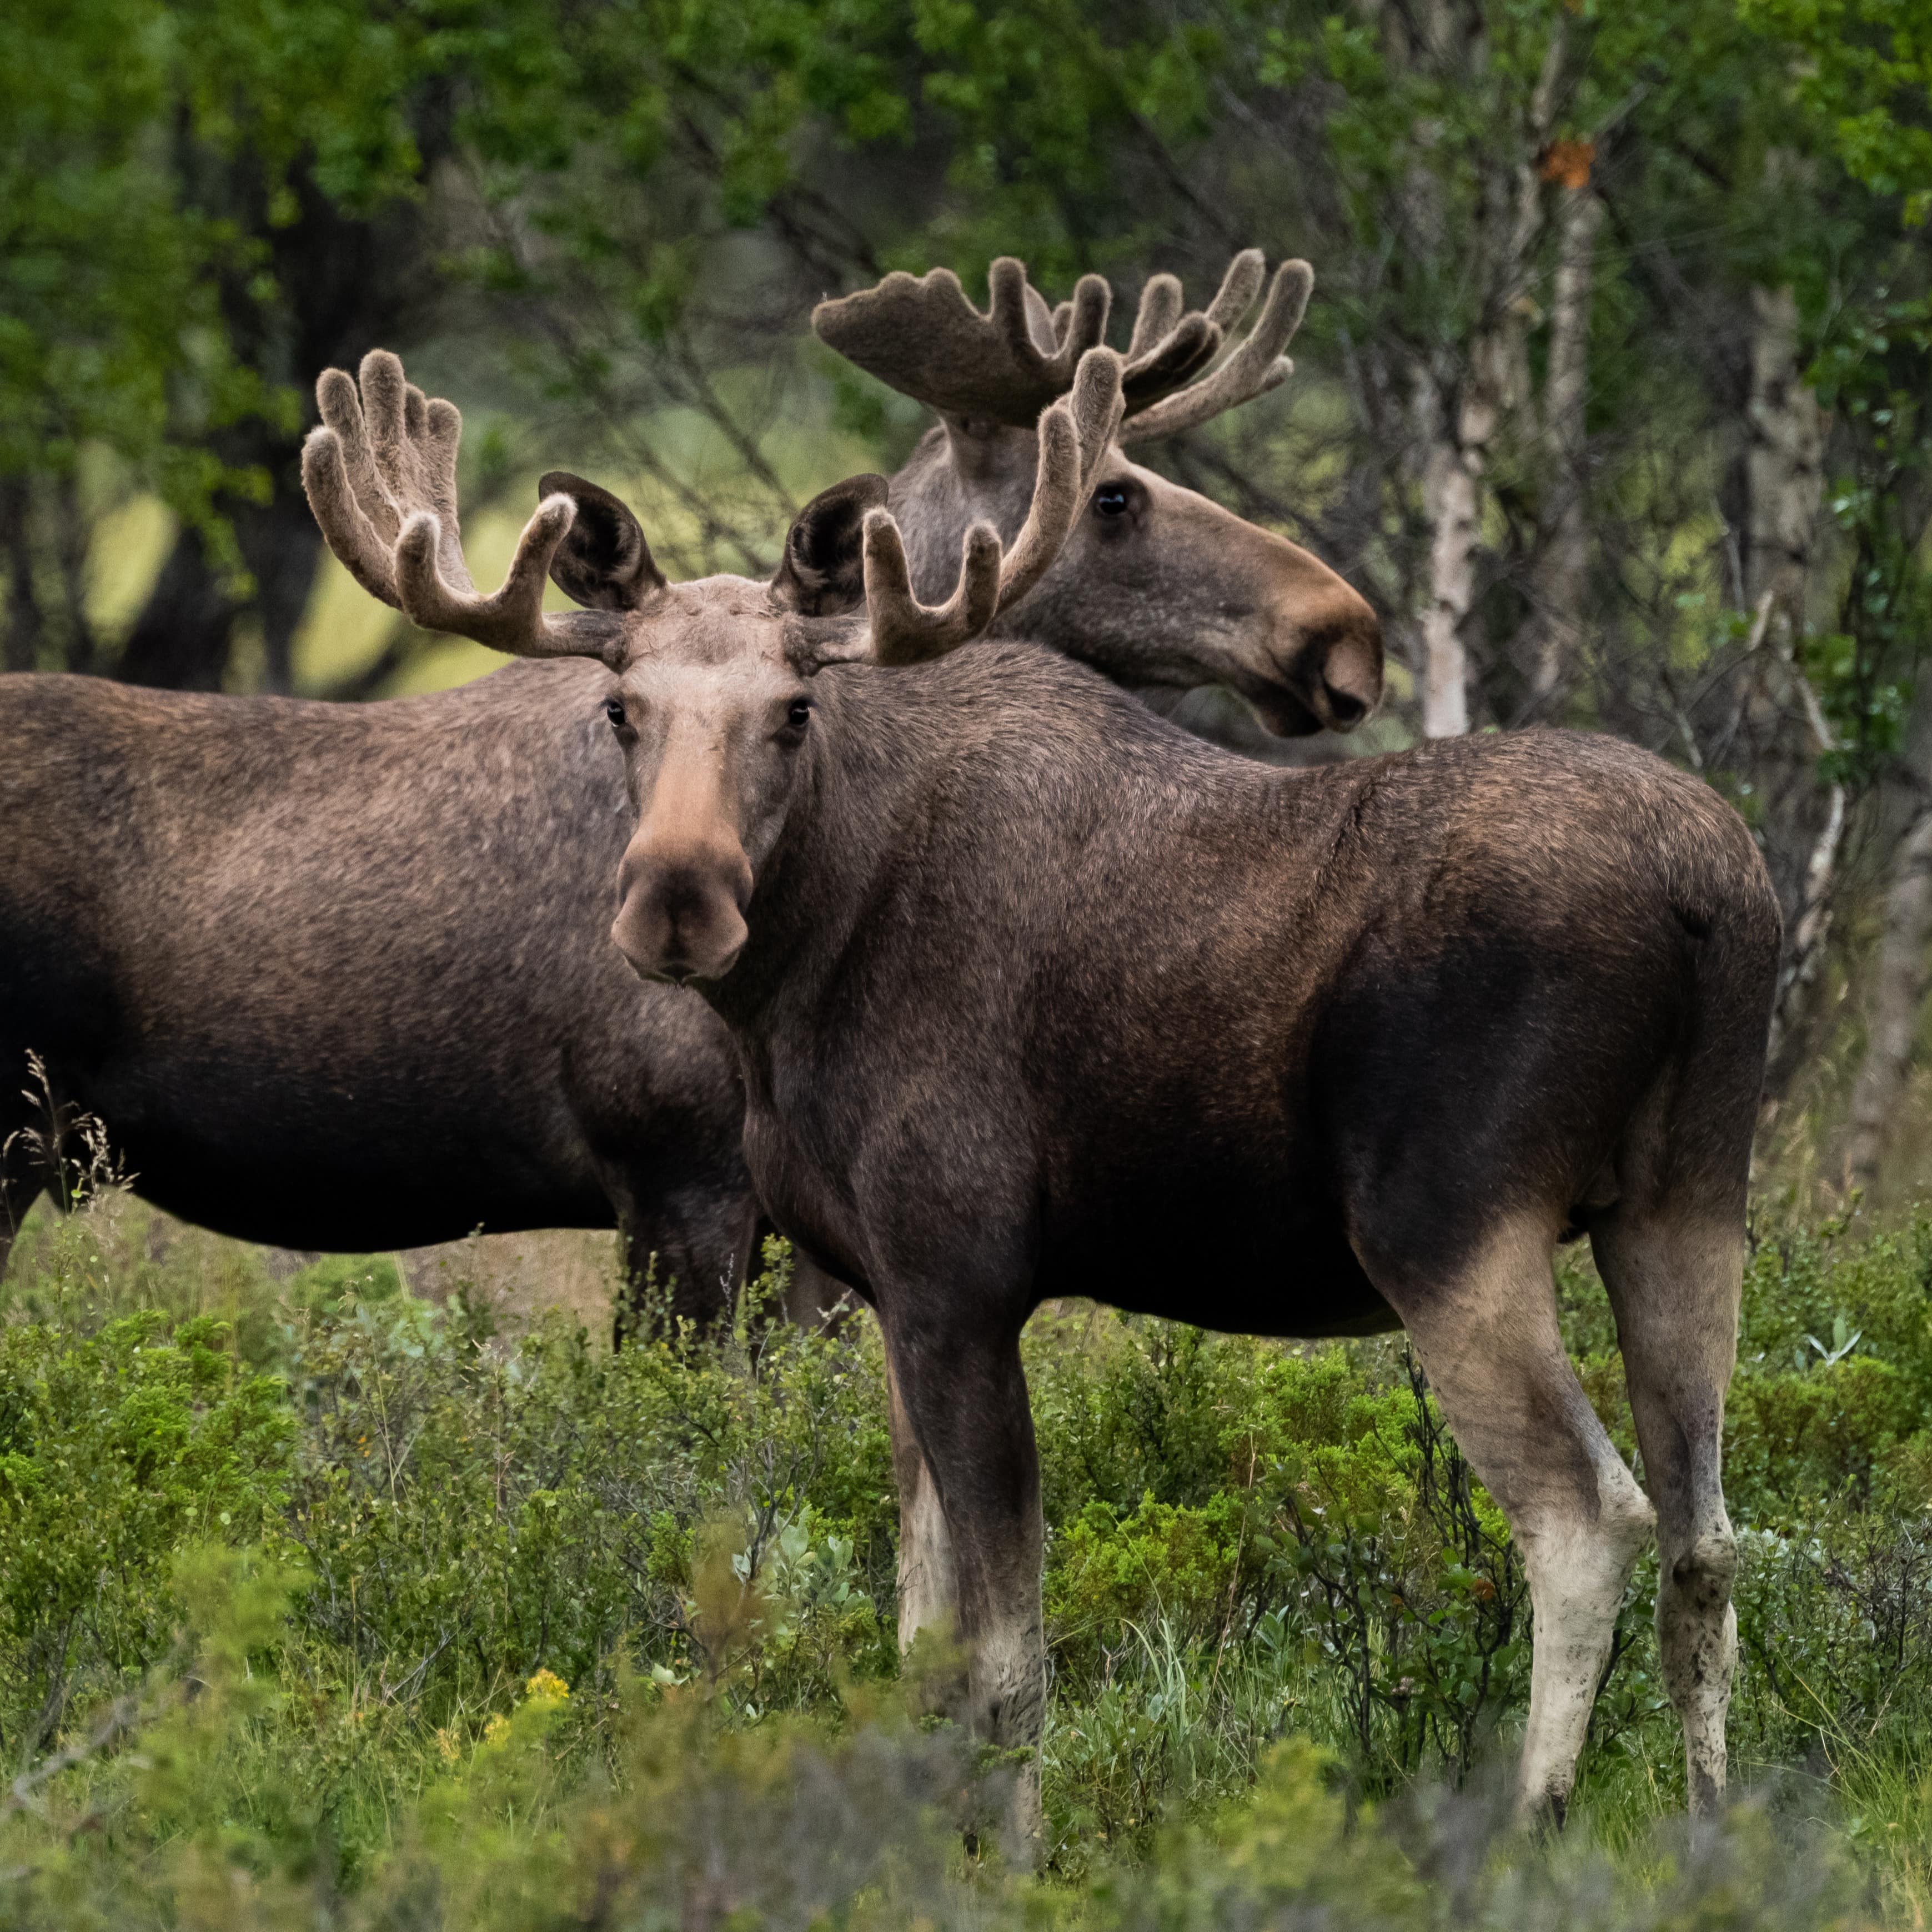 Two moose standing close looking at camera